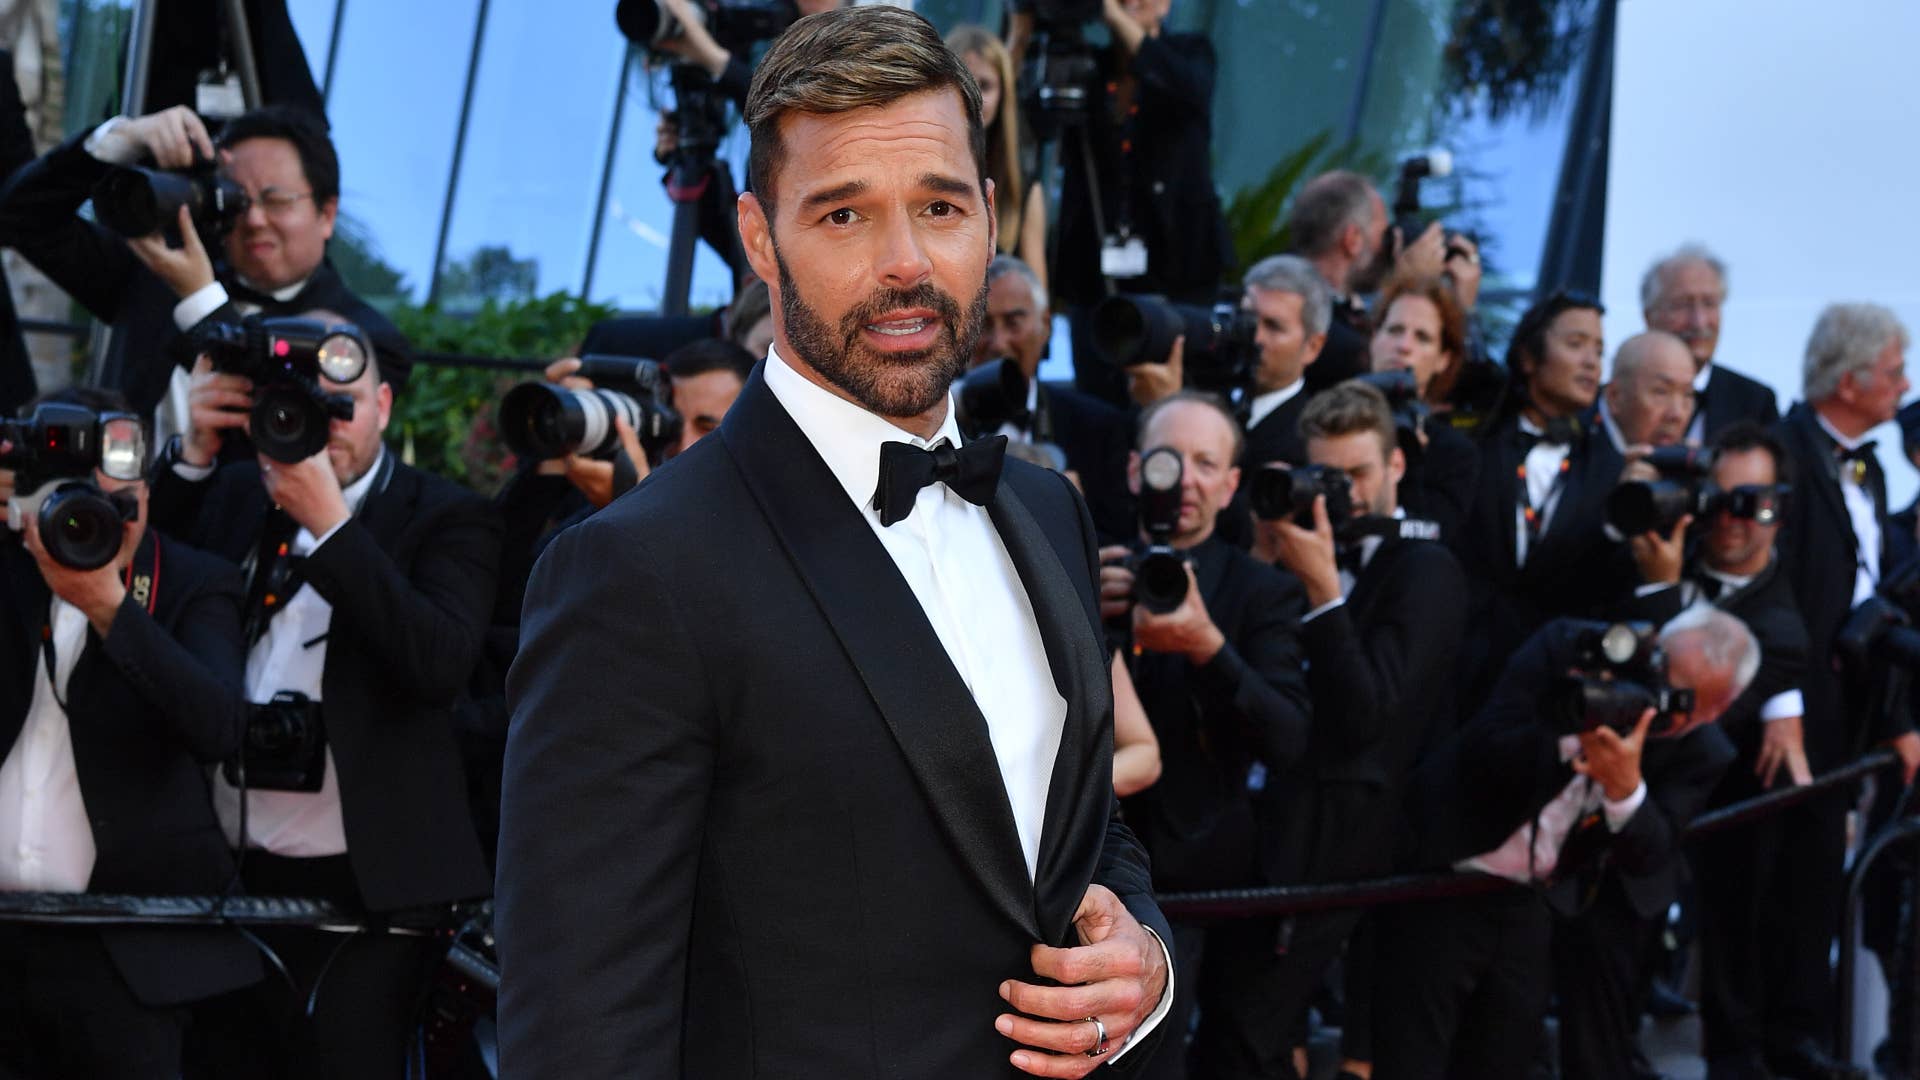 Ricky Martin is pictured at a red carpet event